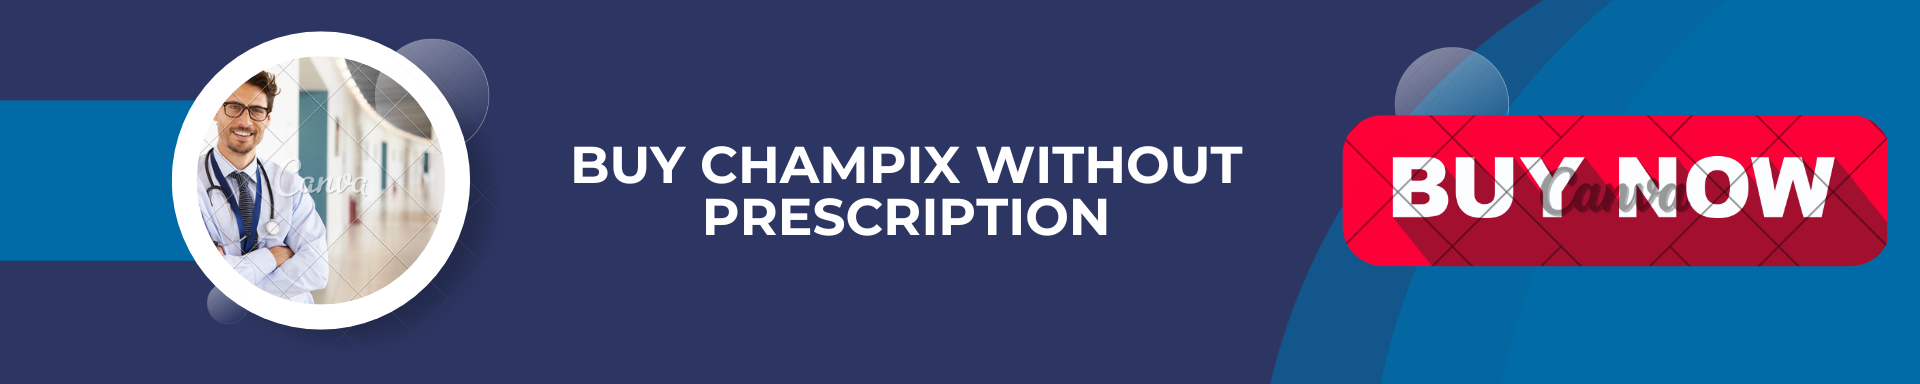 Buy Champix over the counter